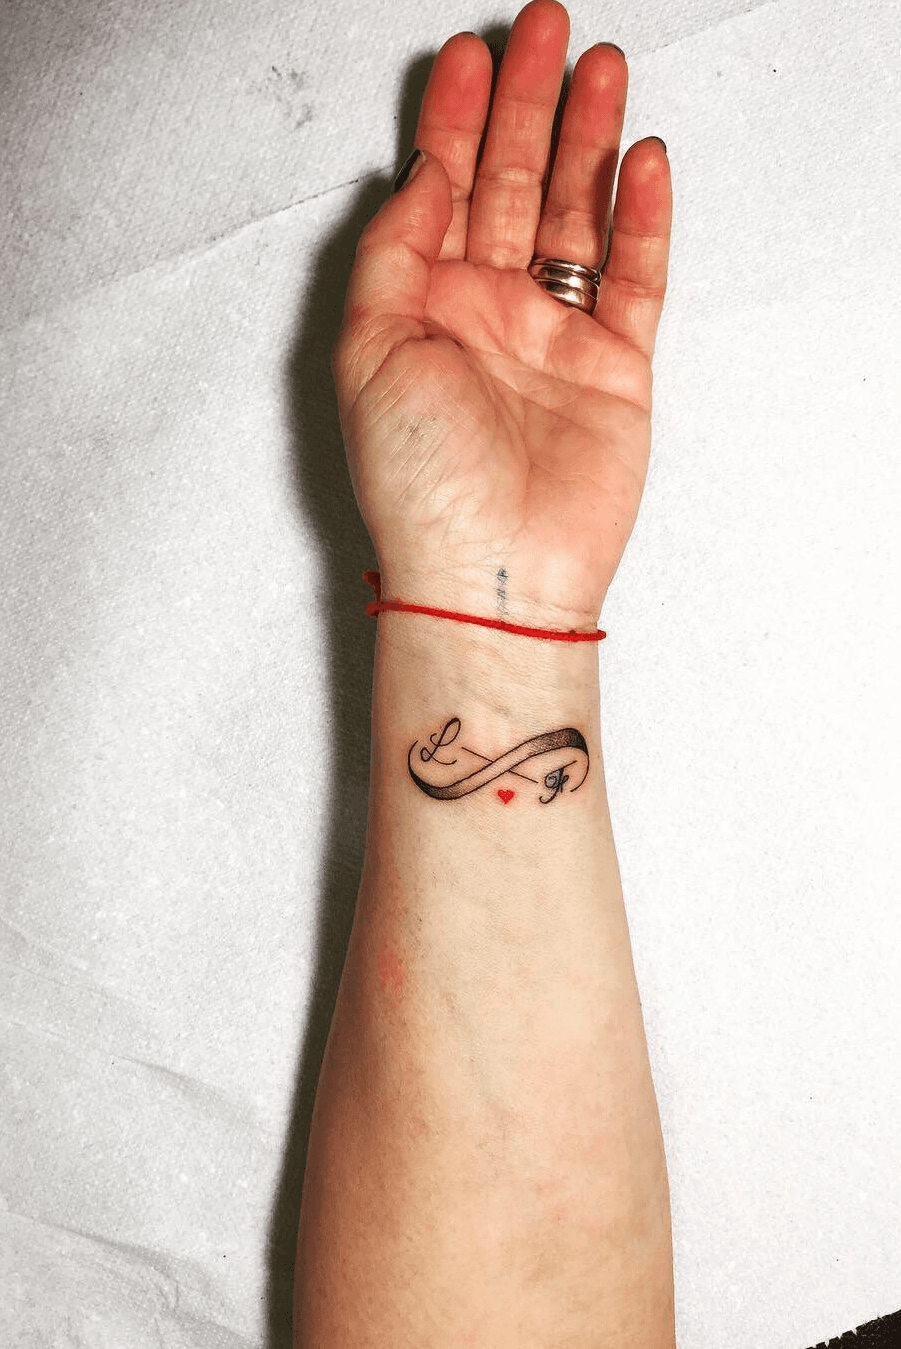 60 Best Good Luck Tattoos and Their Meanings  Saved Tattoo